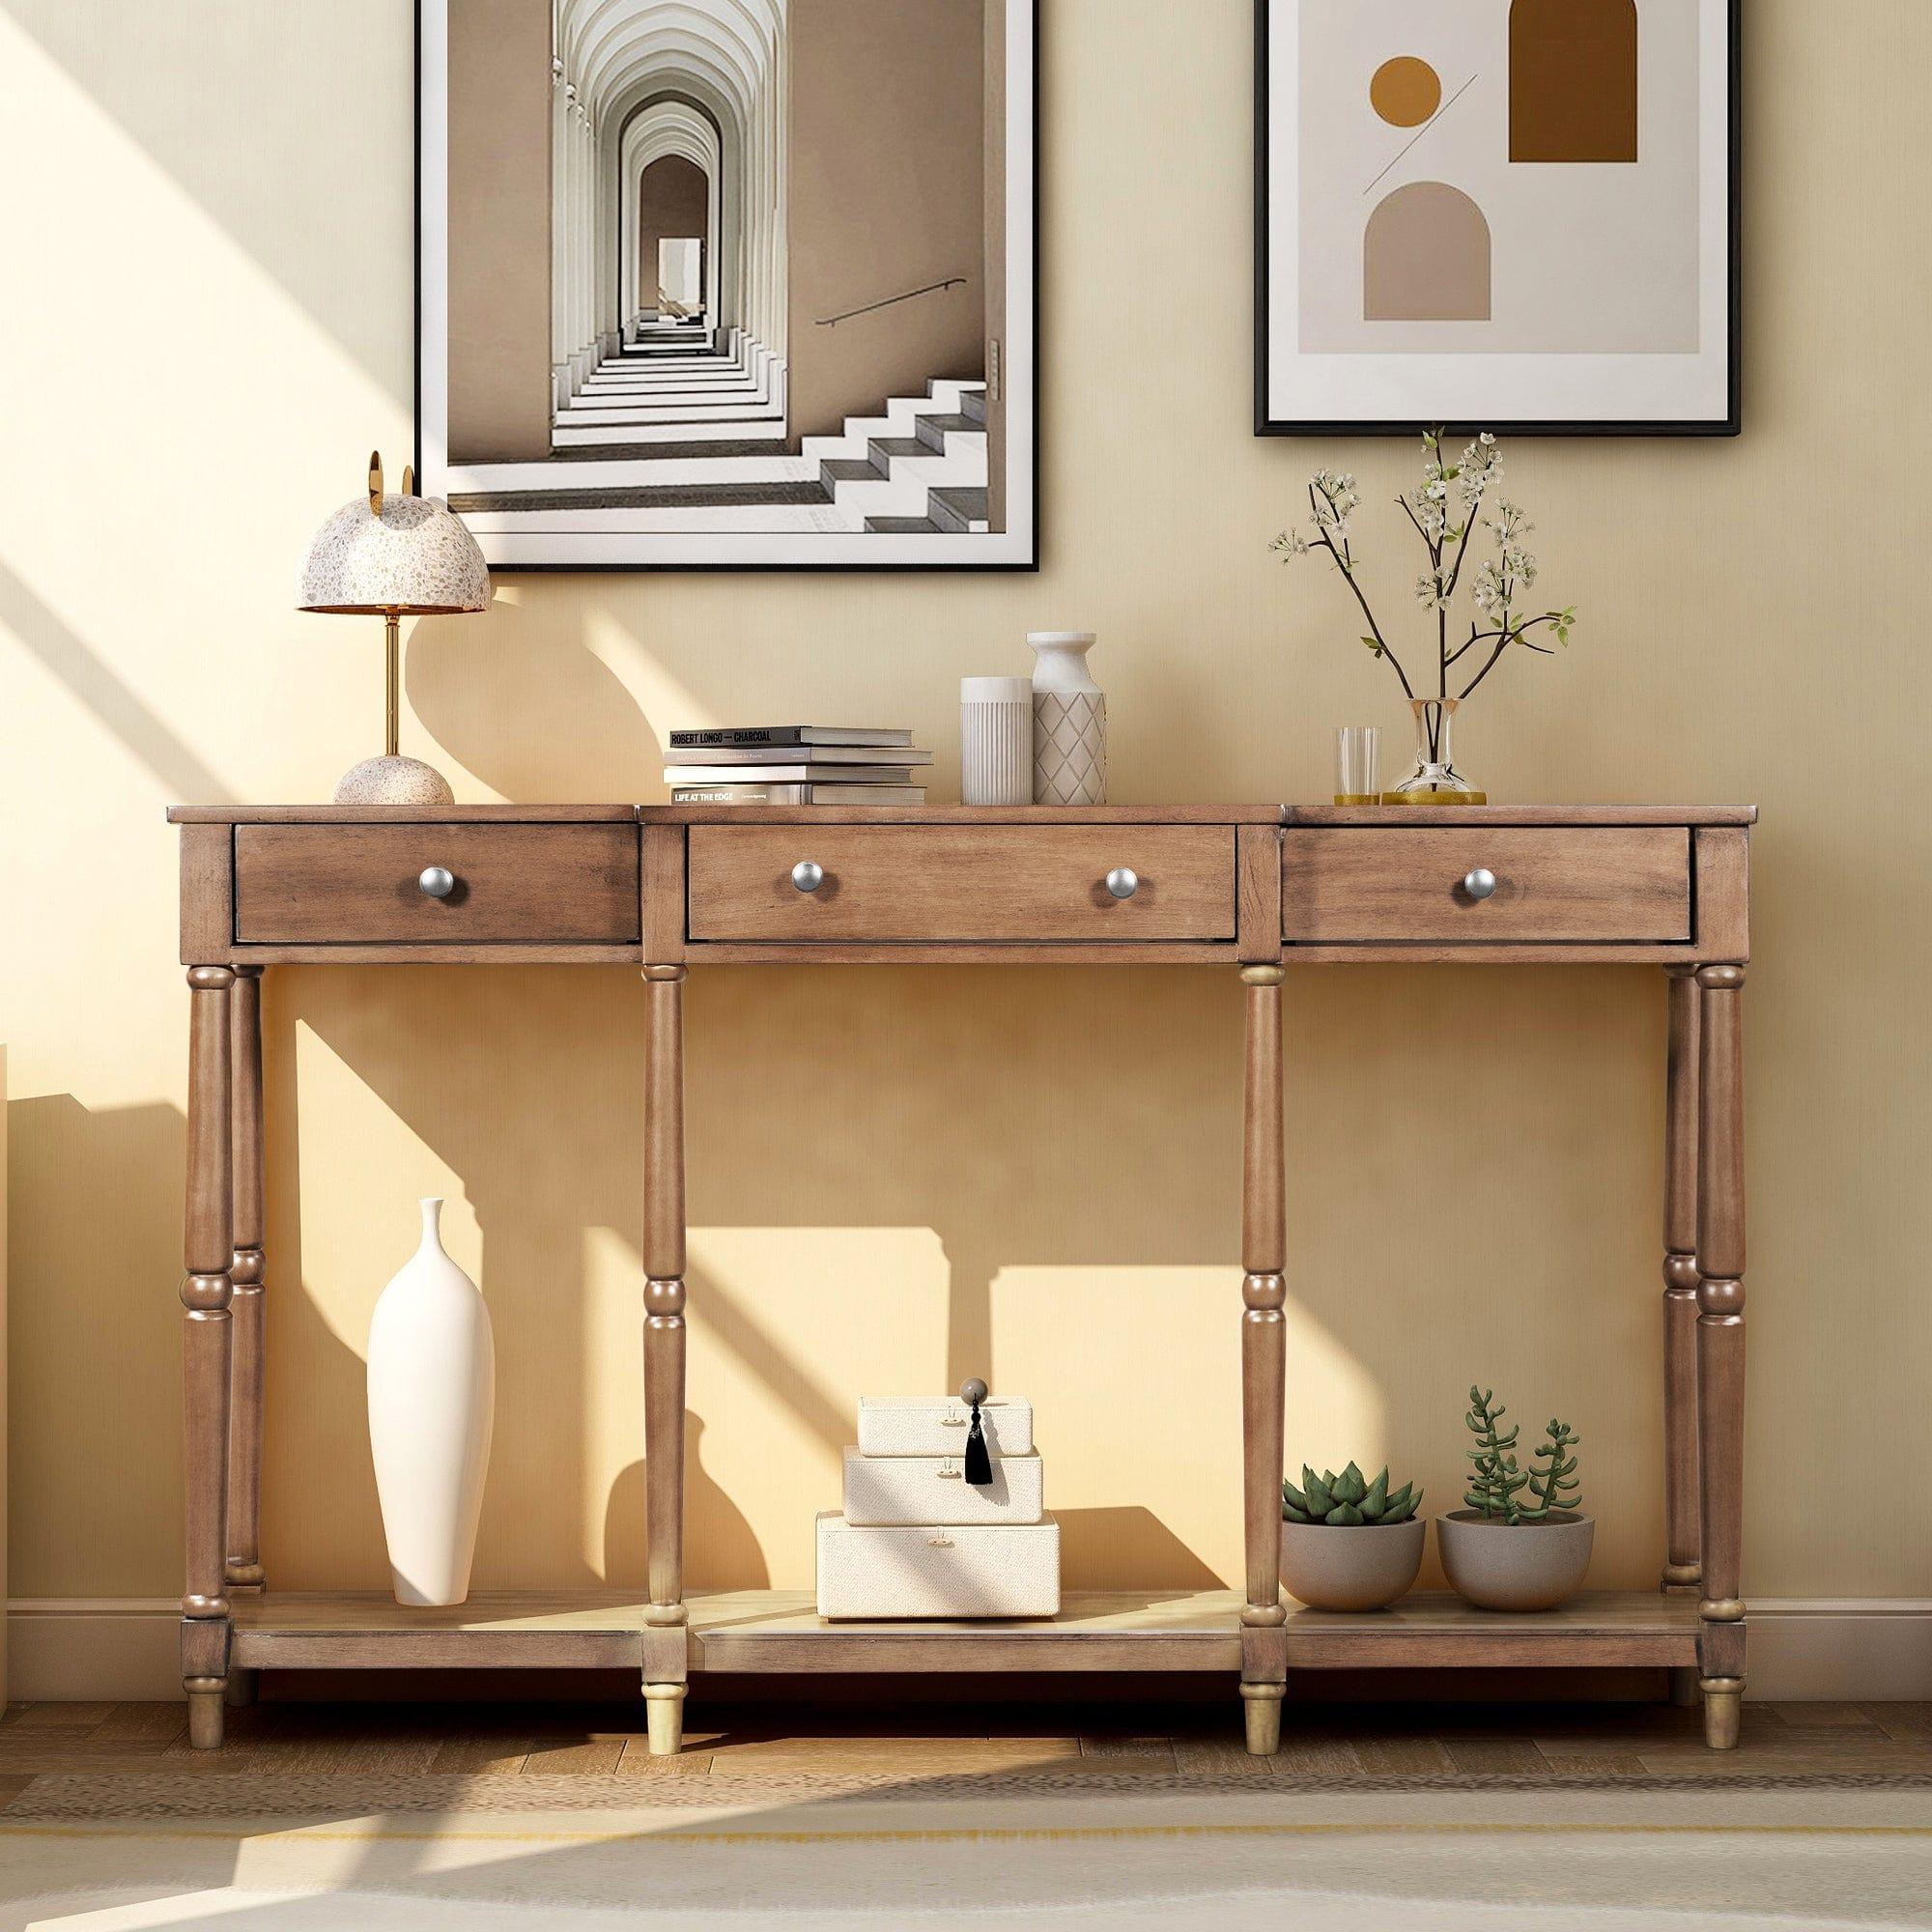 Shop NEW SKU: WF298211AAD----U_STYLE Solid Wood Console Table, Classic Entryway Table with Storage Shelf and Drawer for Home Mademoiselle Home Decor